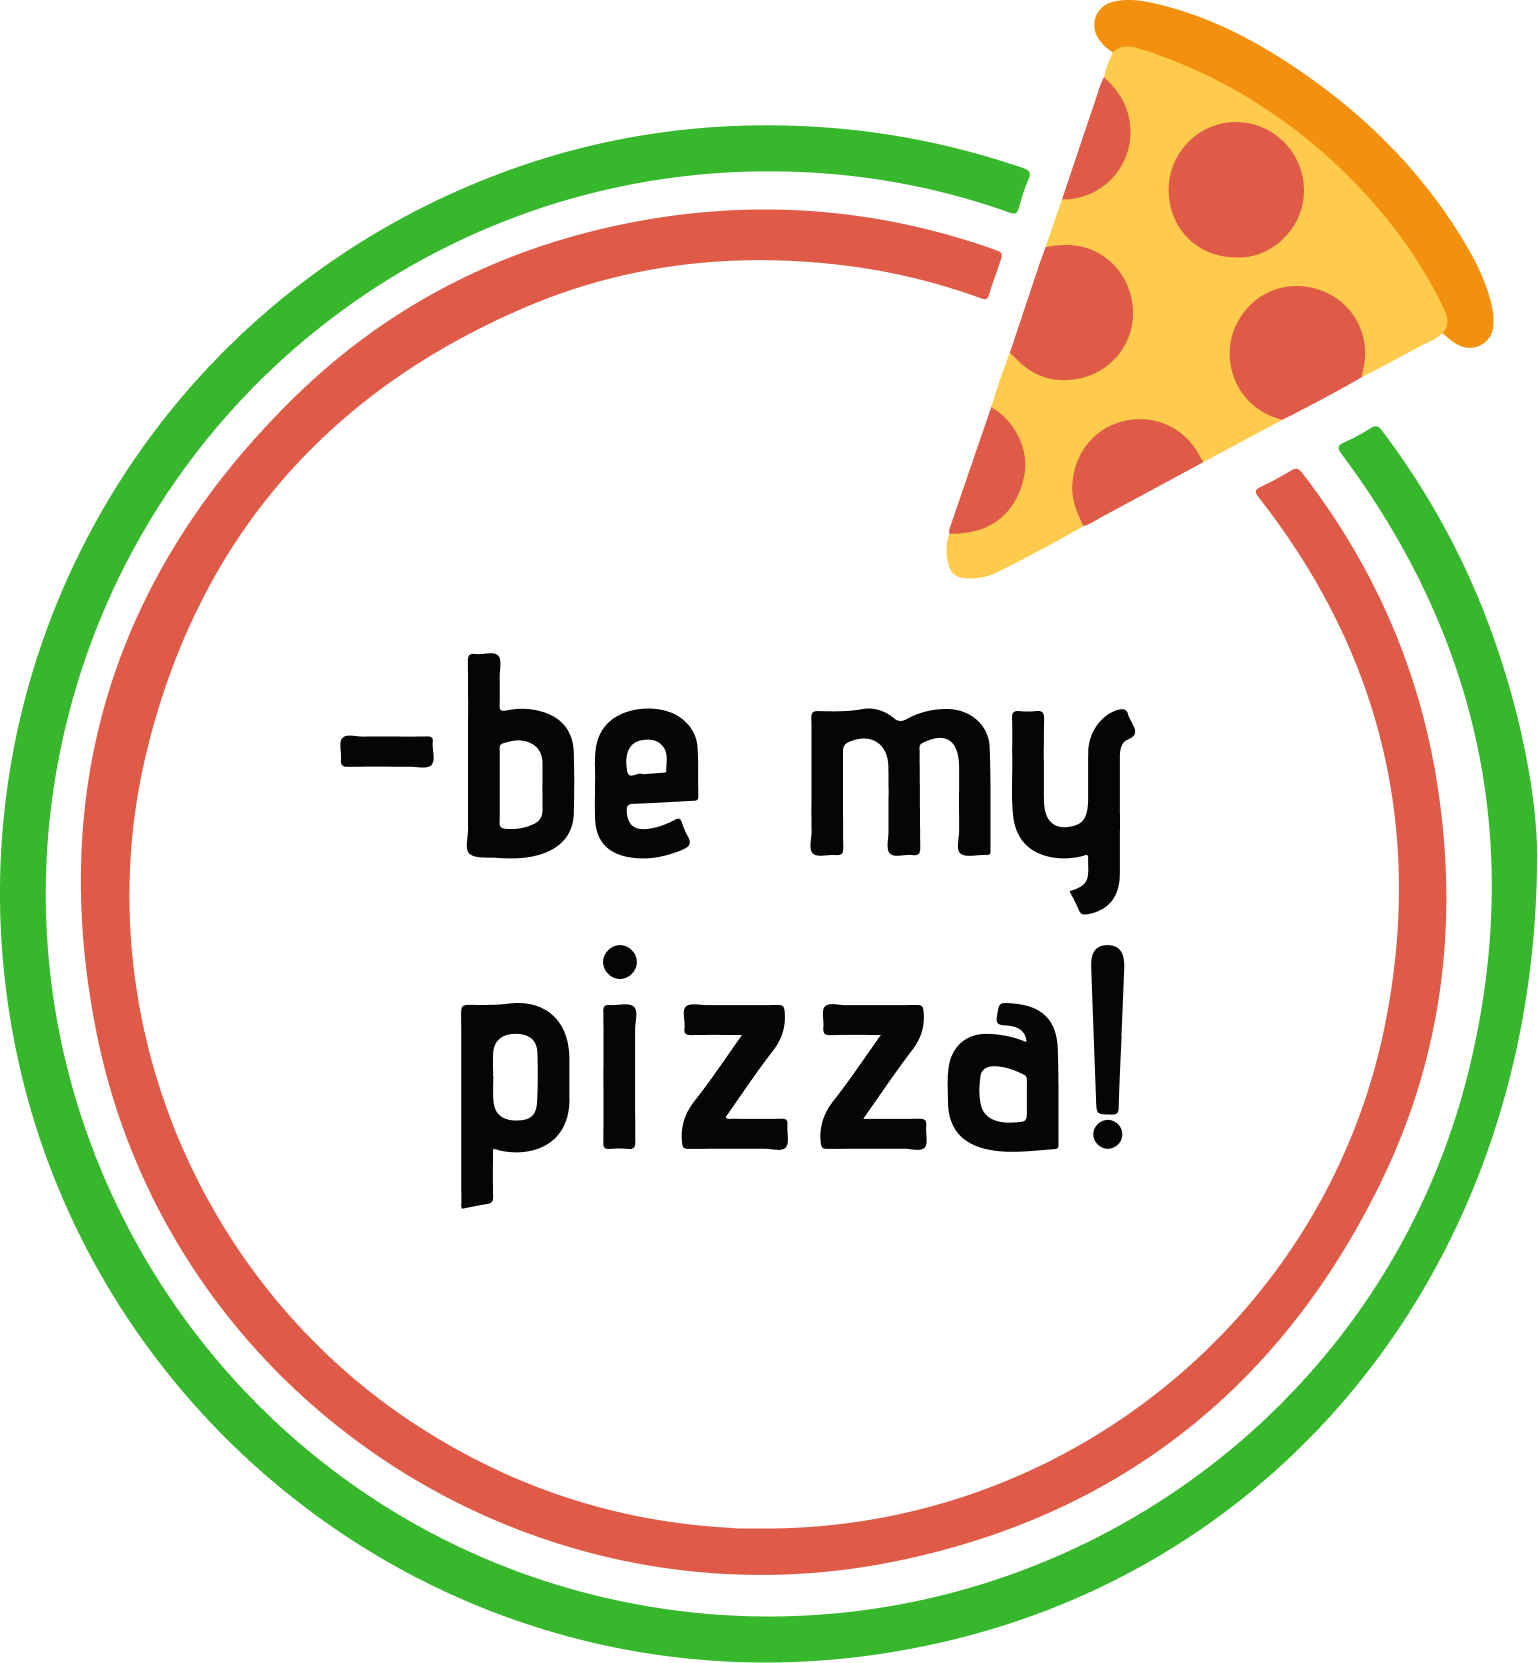 -be my pizza!